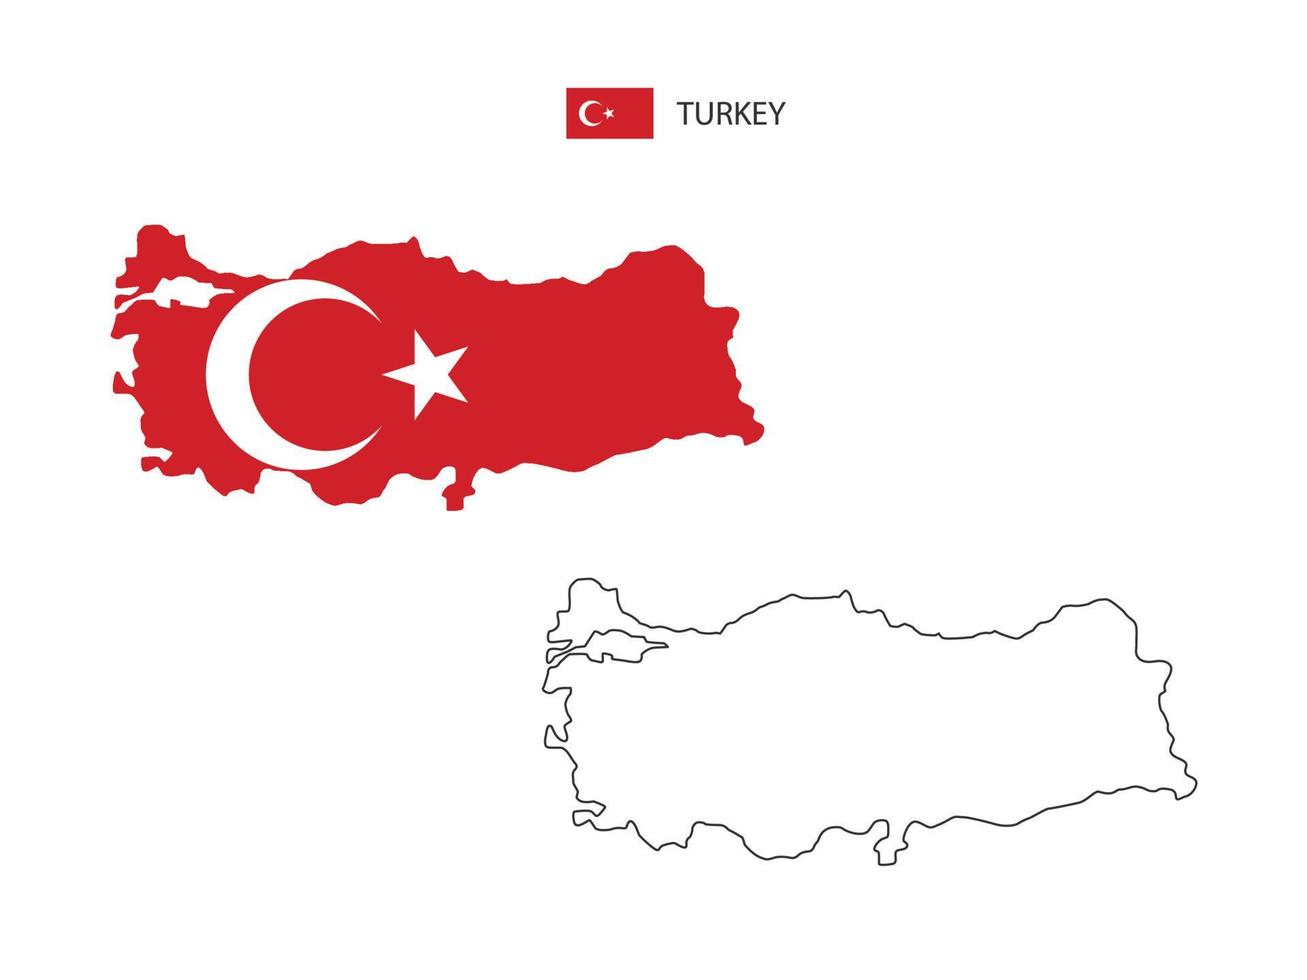 Turkey map city vector divided by outline simplicity style. Have 2 versions, black thin line version and color of country flag version. Both map were on the white background.